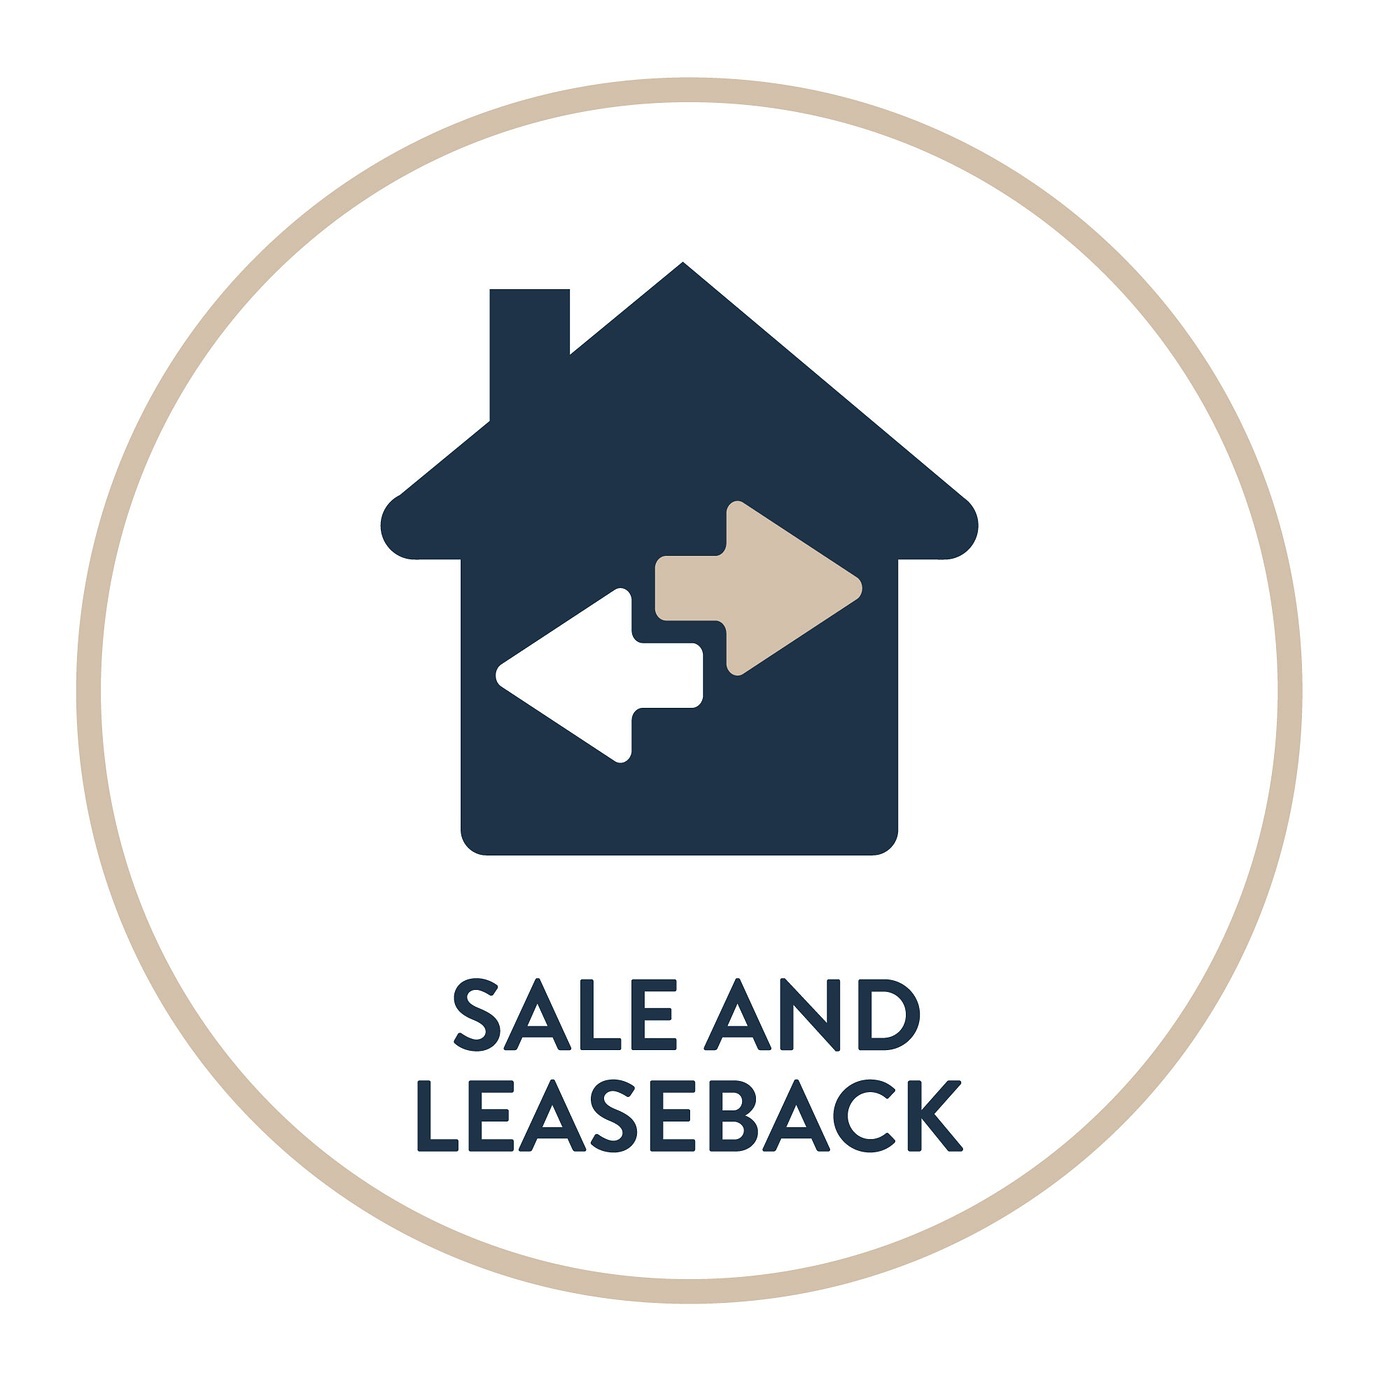 Sales And Leaseback Is The Best Financing Equipment.